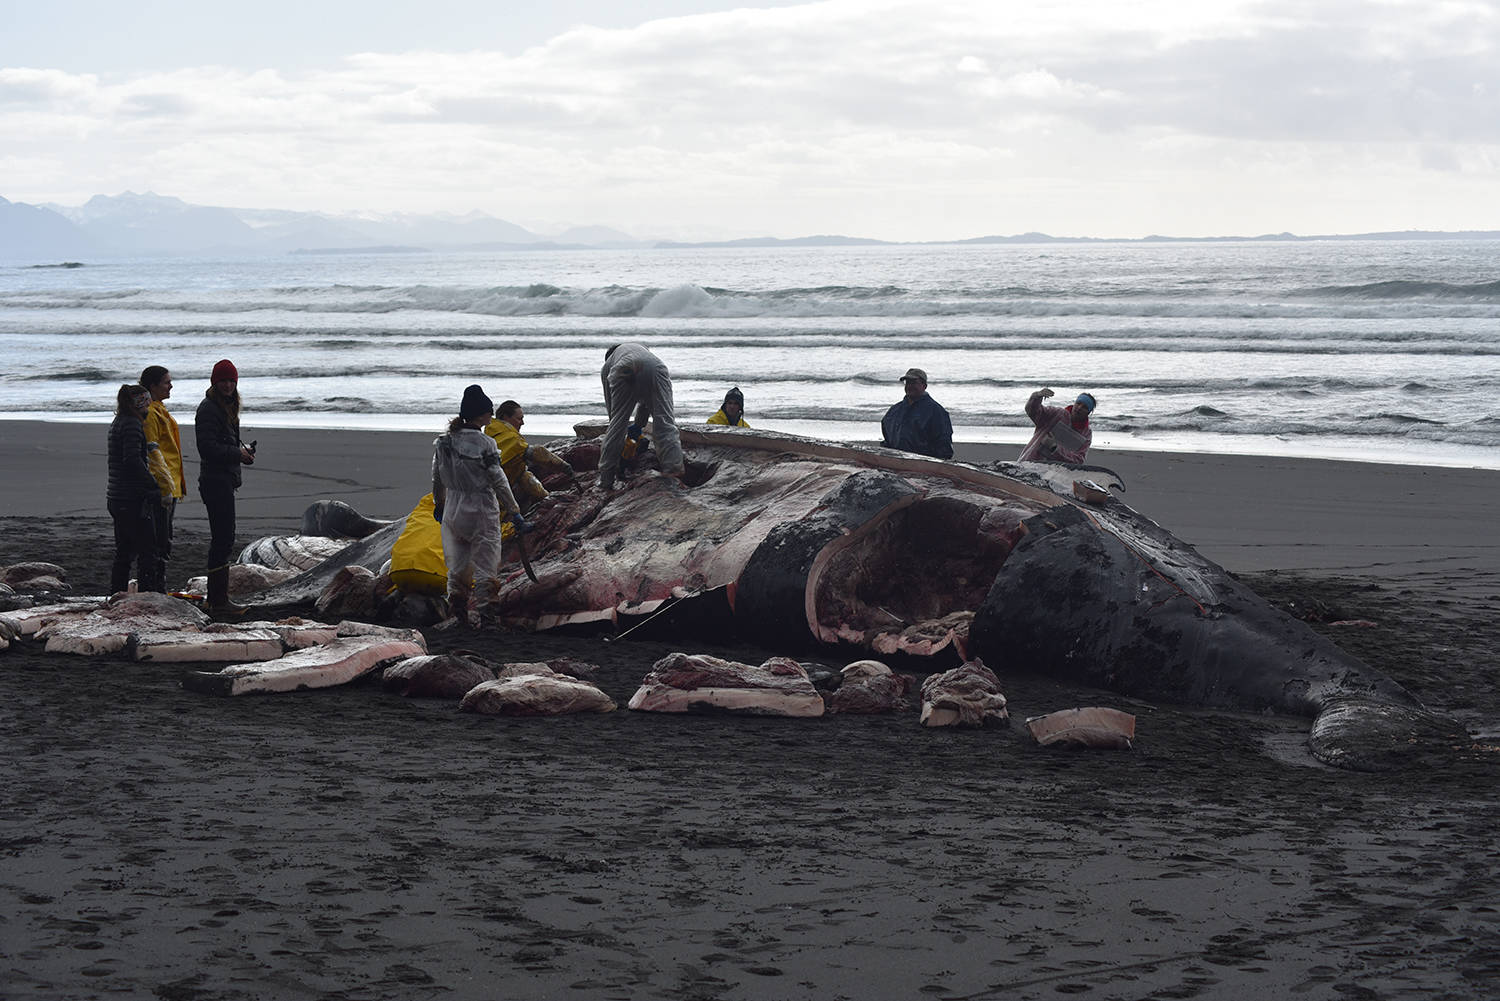 Volunteers with the Alaska Marine Mammal Stranding Network take samples from a beached humpback whale on Kuzof Island on Thursday, March 18, 2021. (Courtesy Photo / Alaska Marine Mammal Stranding Network)